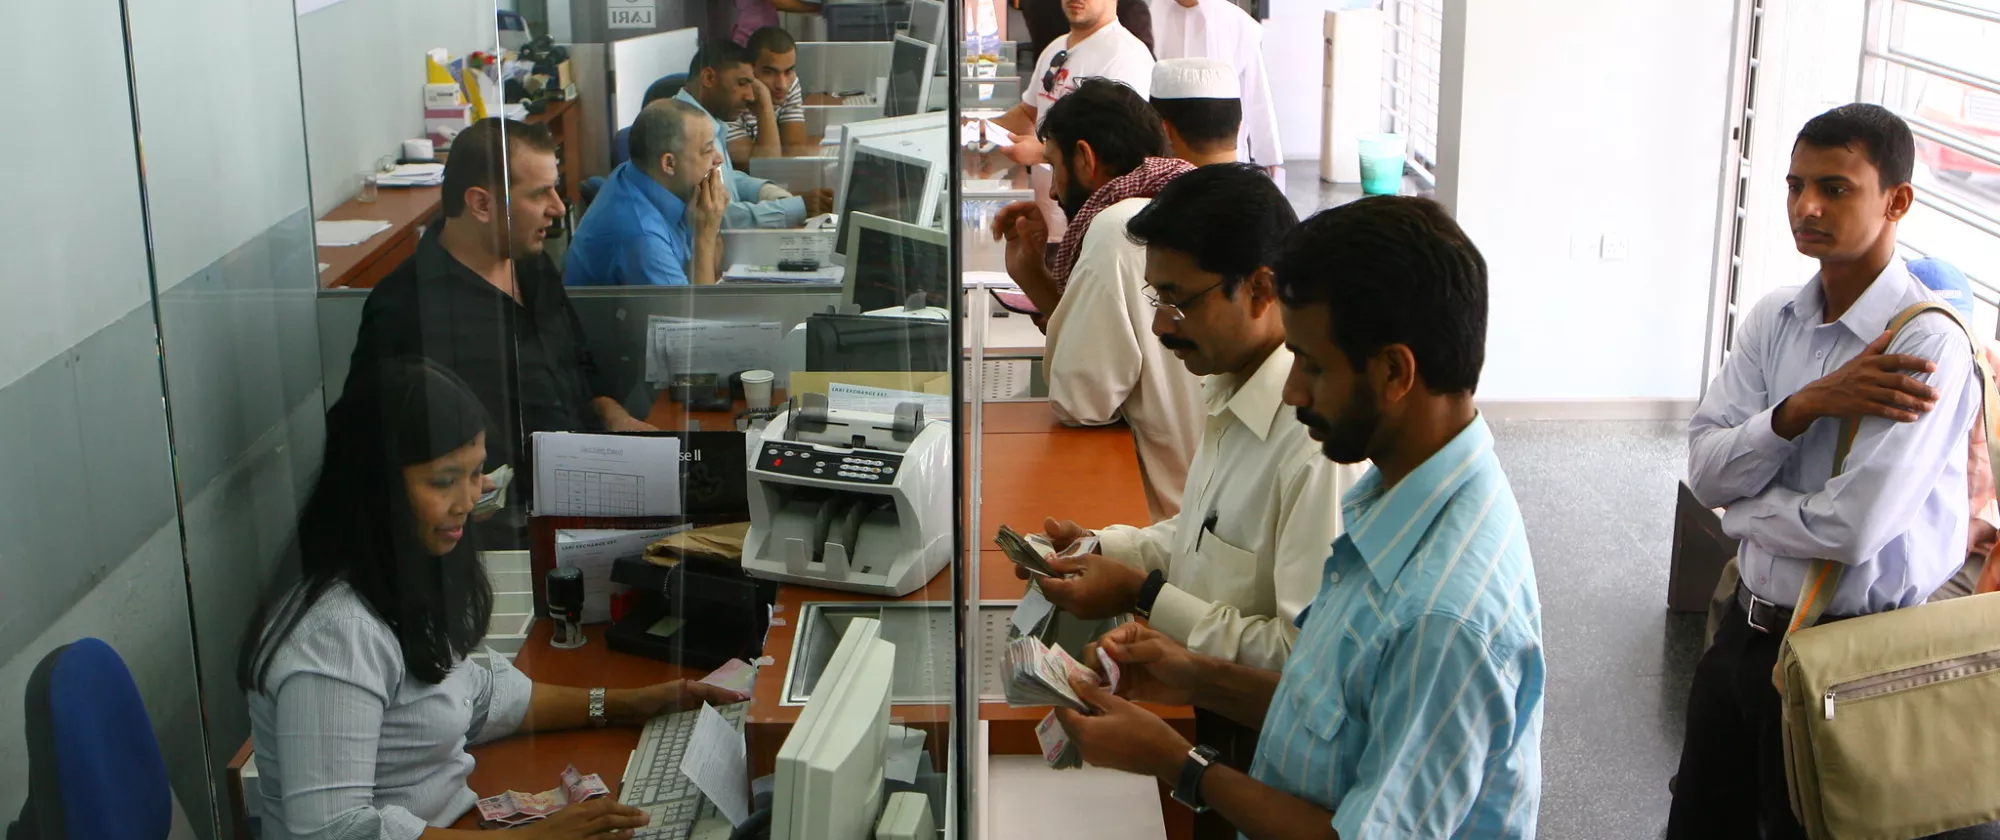 Workers at a local currency exchange and money transfer office provide service to customers.